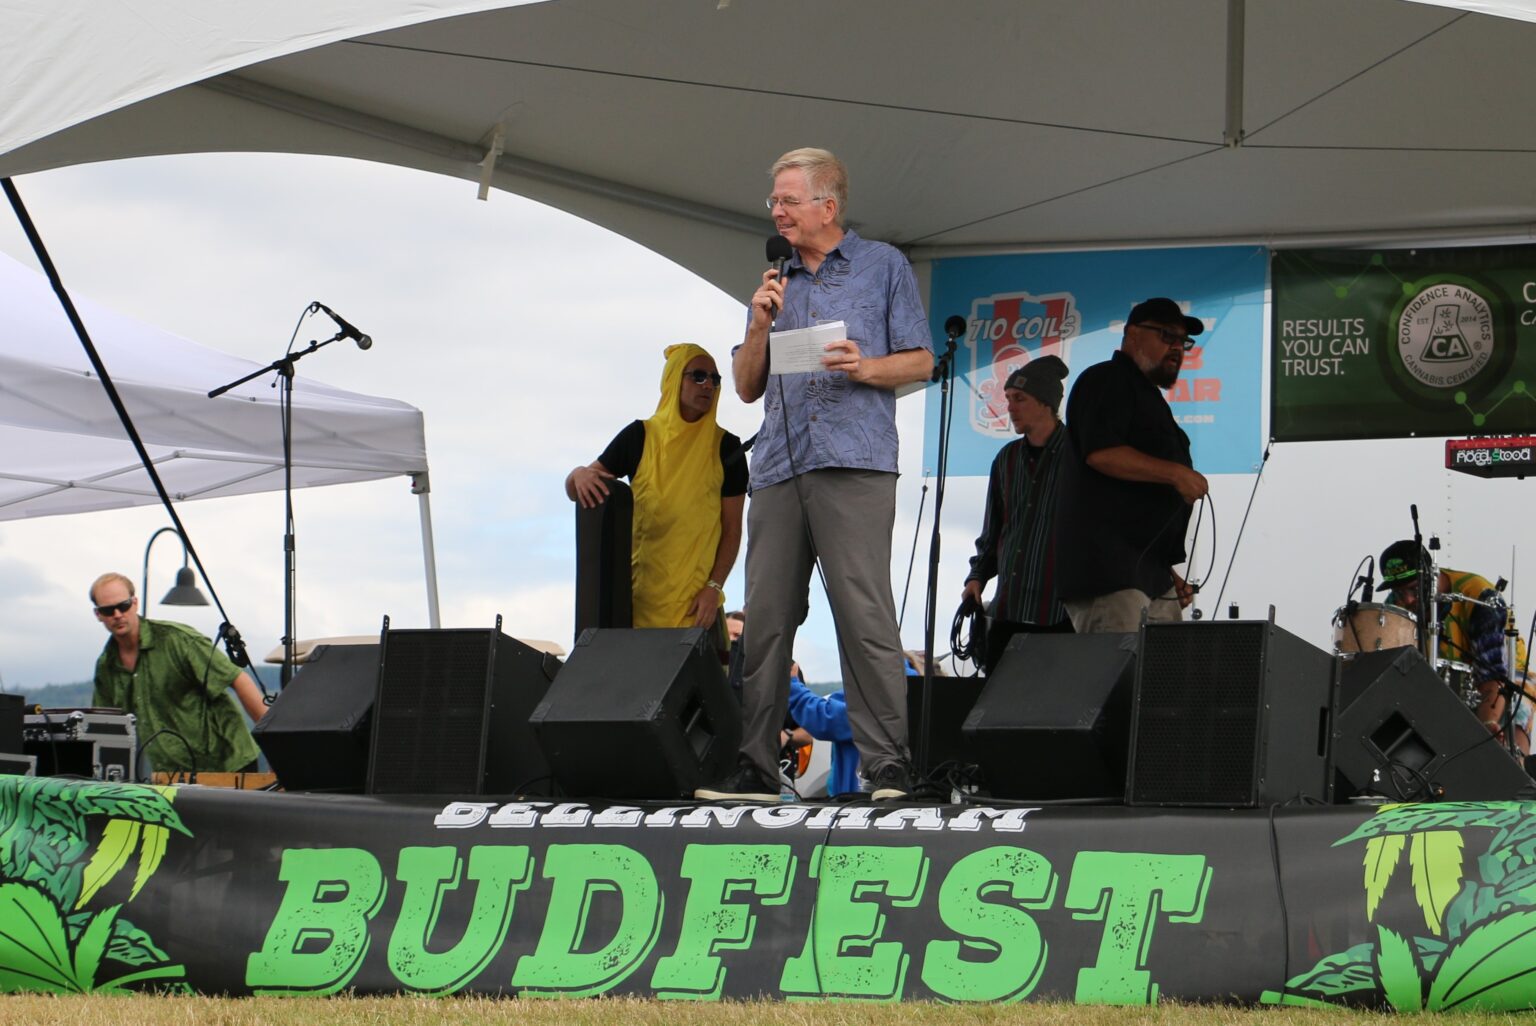 TV personality and travel writer Rick Steves talks to the crowd during the Bellingham Budfest at Zuanich Point Park on July 16.